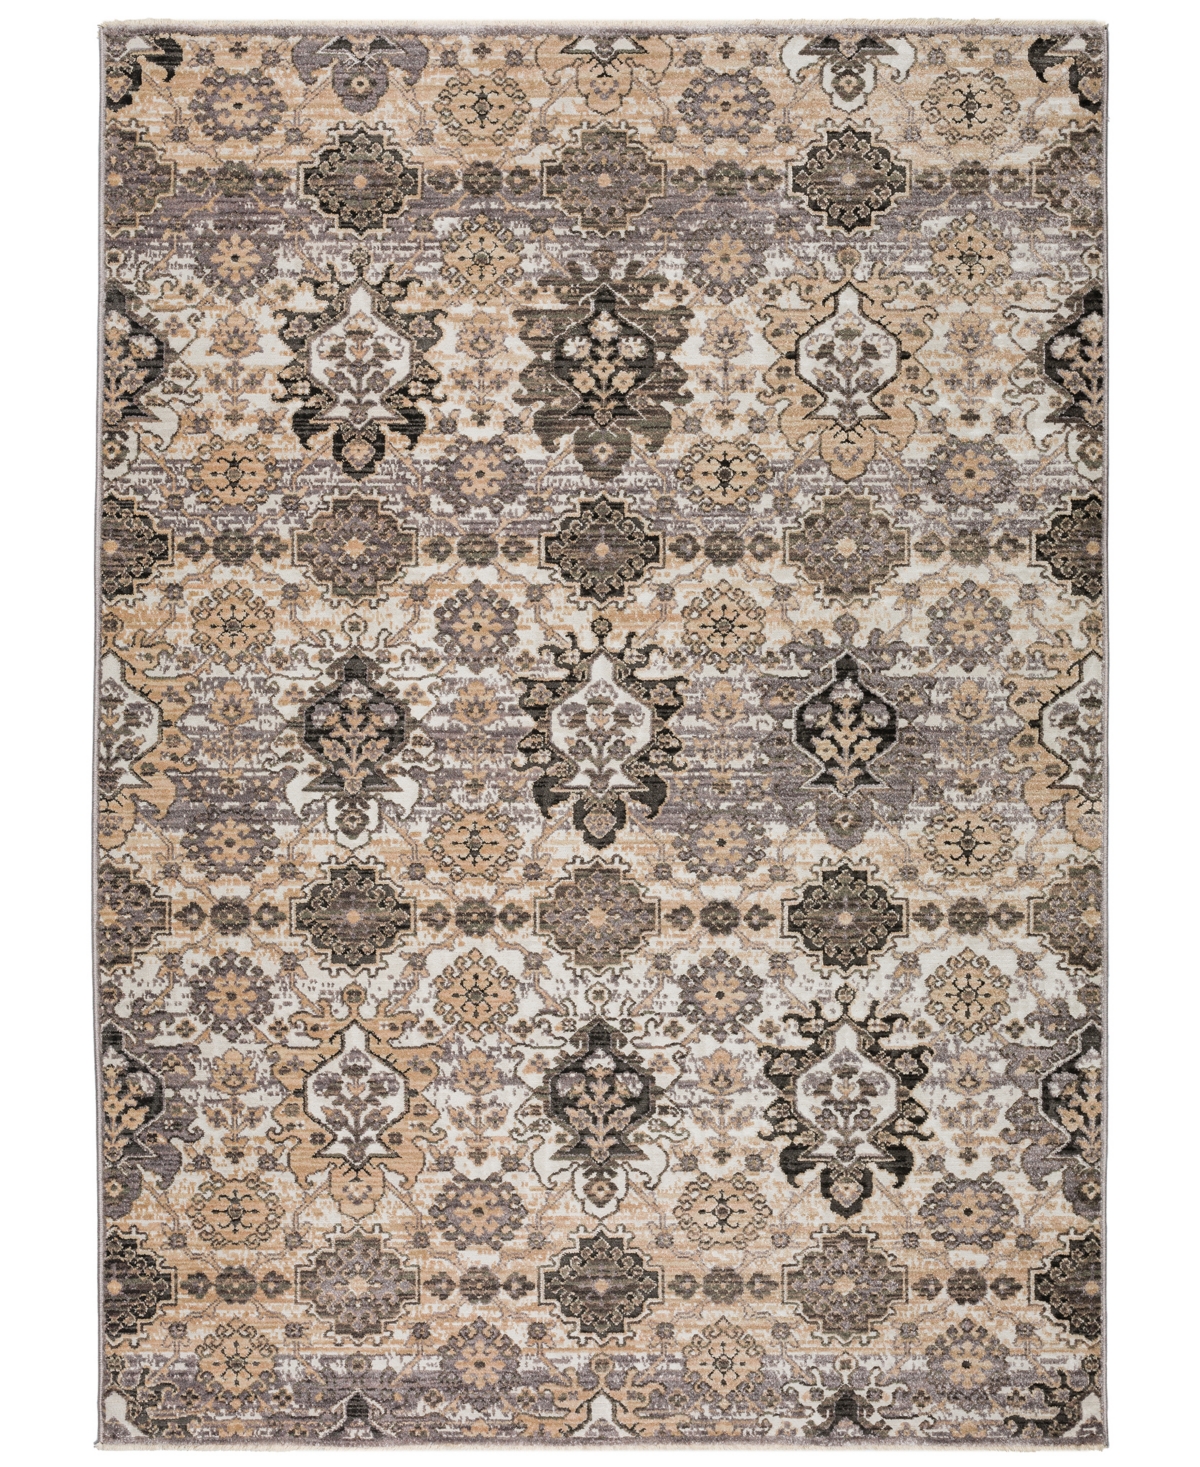 D Style Sergey Sgy7 9' X 12'6" Area Rug In Gray